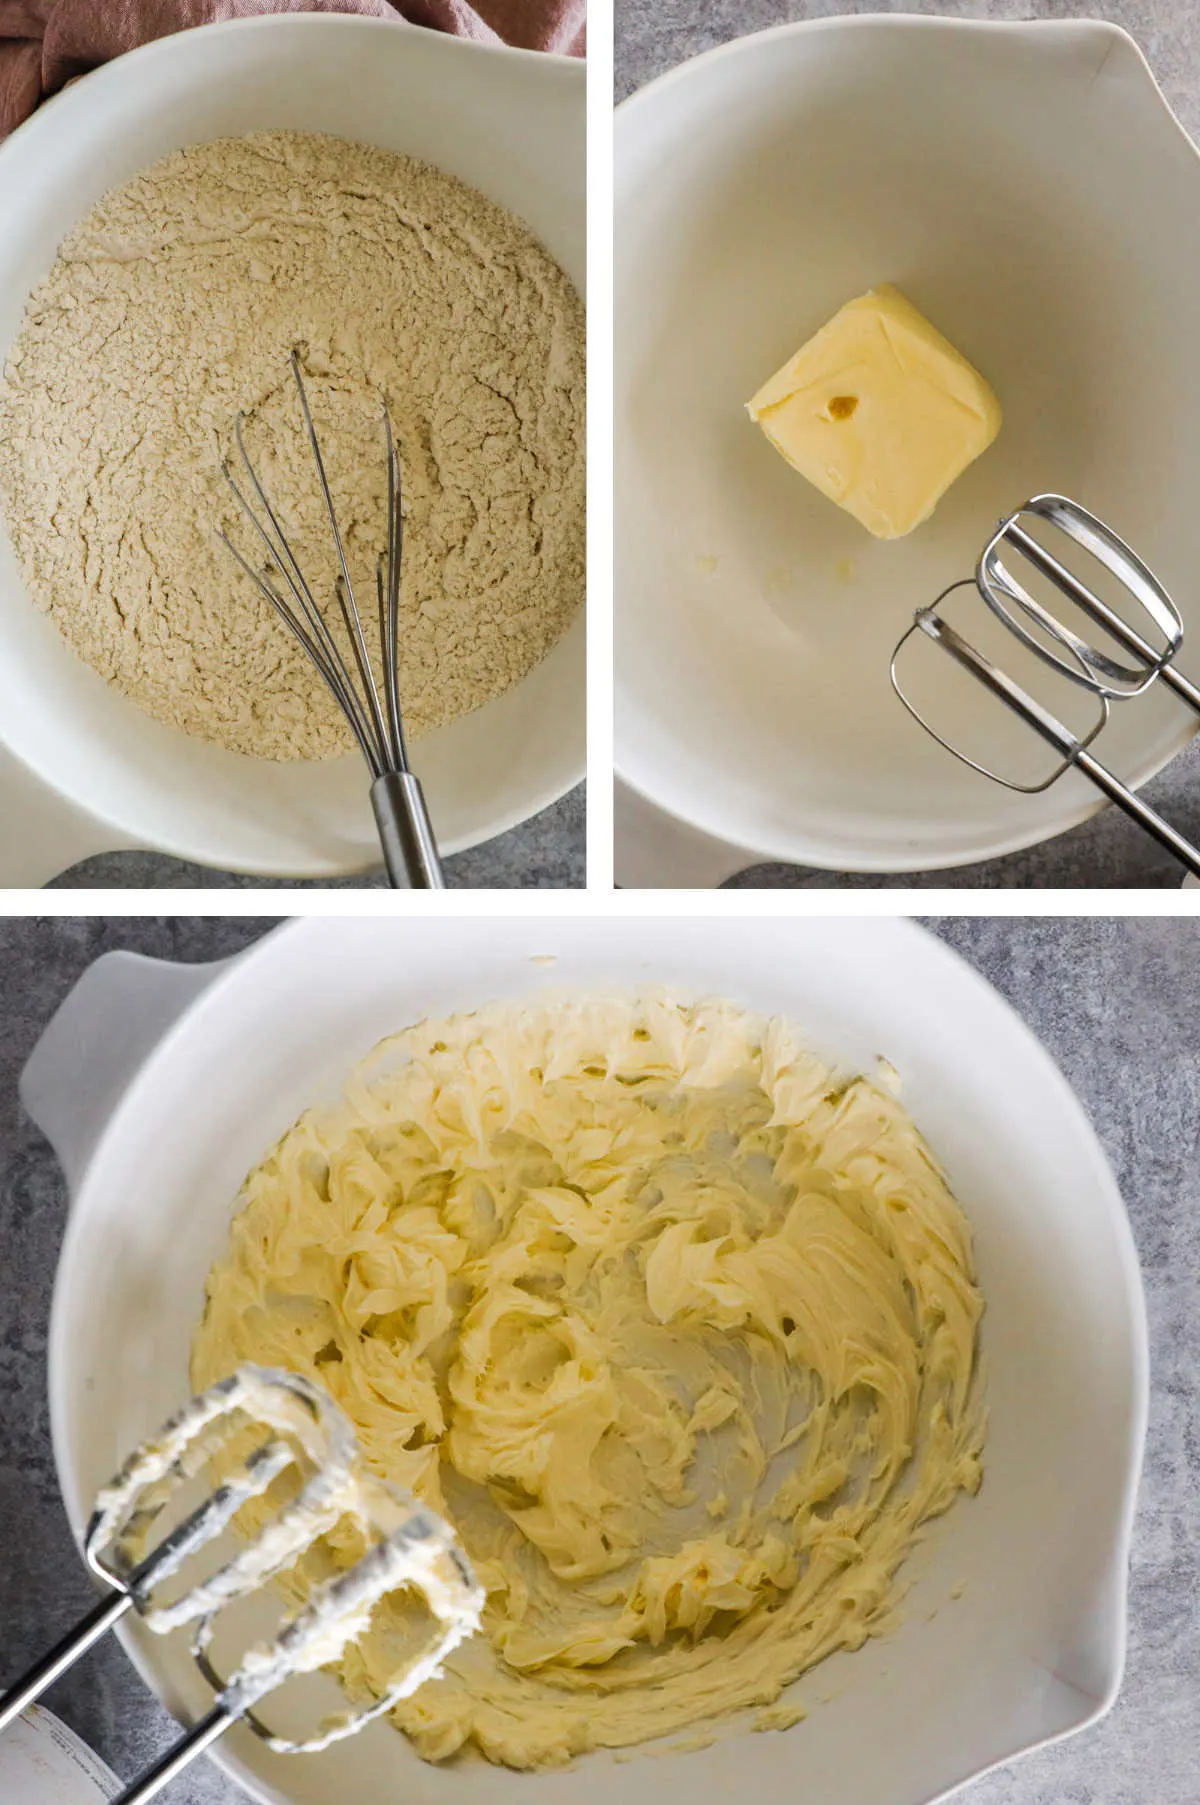 Three overhead images in one: 1. Dry ingredients mixed in a white bowl. 2. Room temp butter in a white bowl with hand mixer. 3. Butter is whipped with hand mixer. 